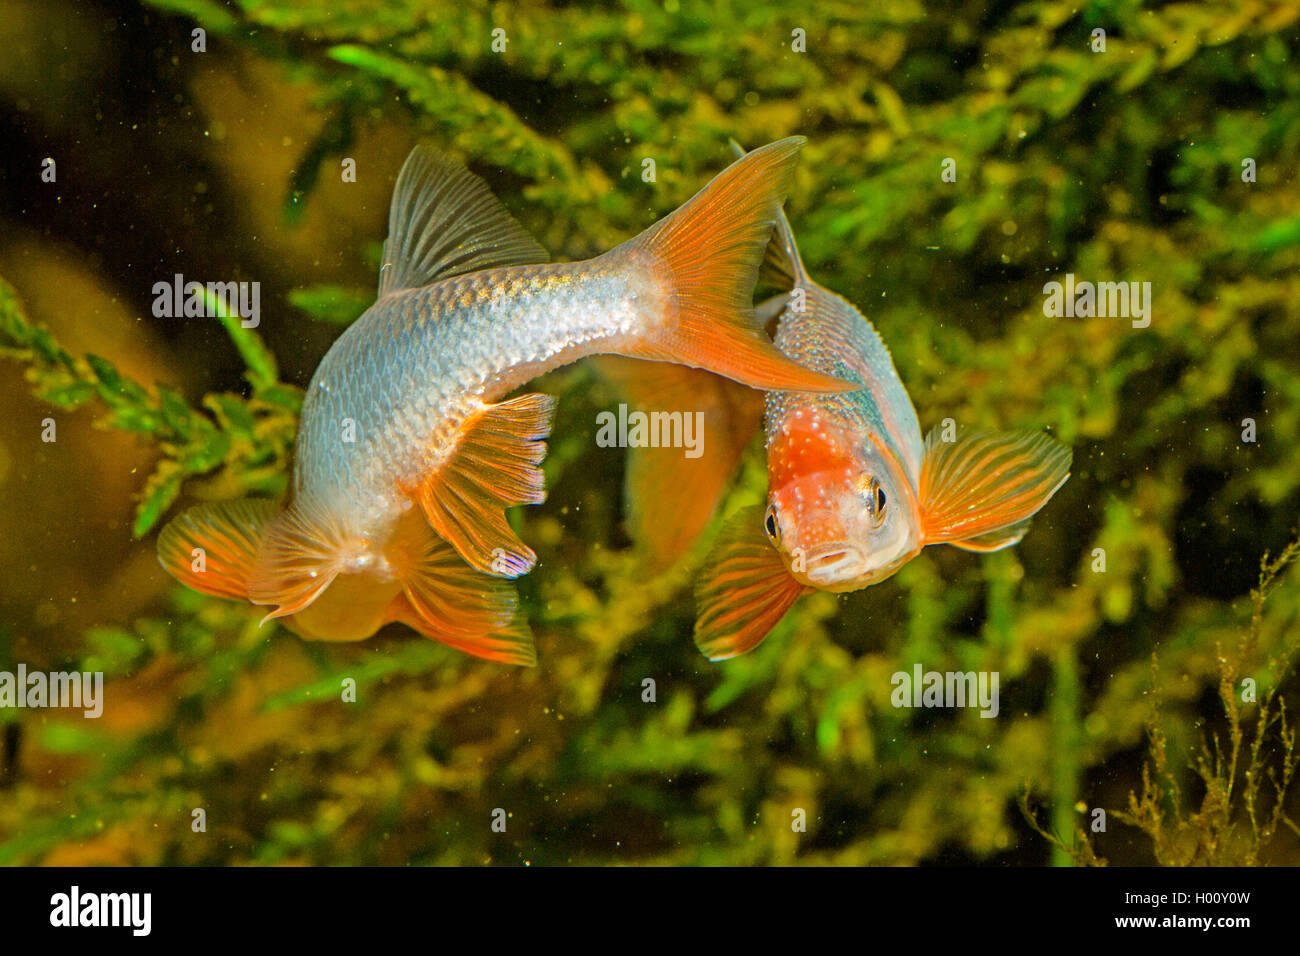 red shiner (Notropis lutrensis, Cyprinella lutrensis), rivaling males with nuptial colouration Stock Photo